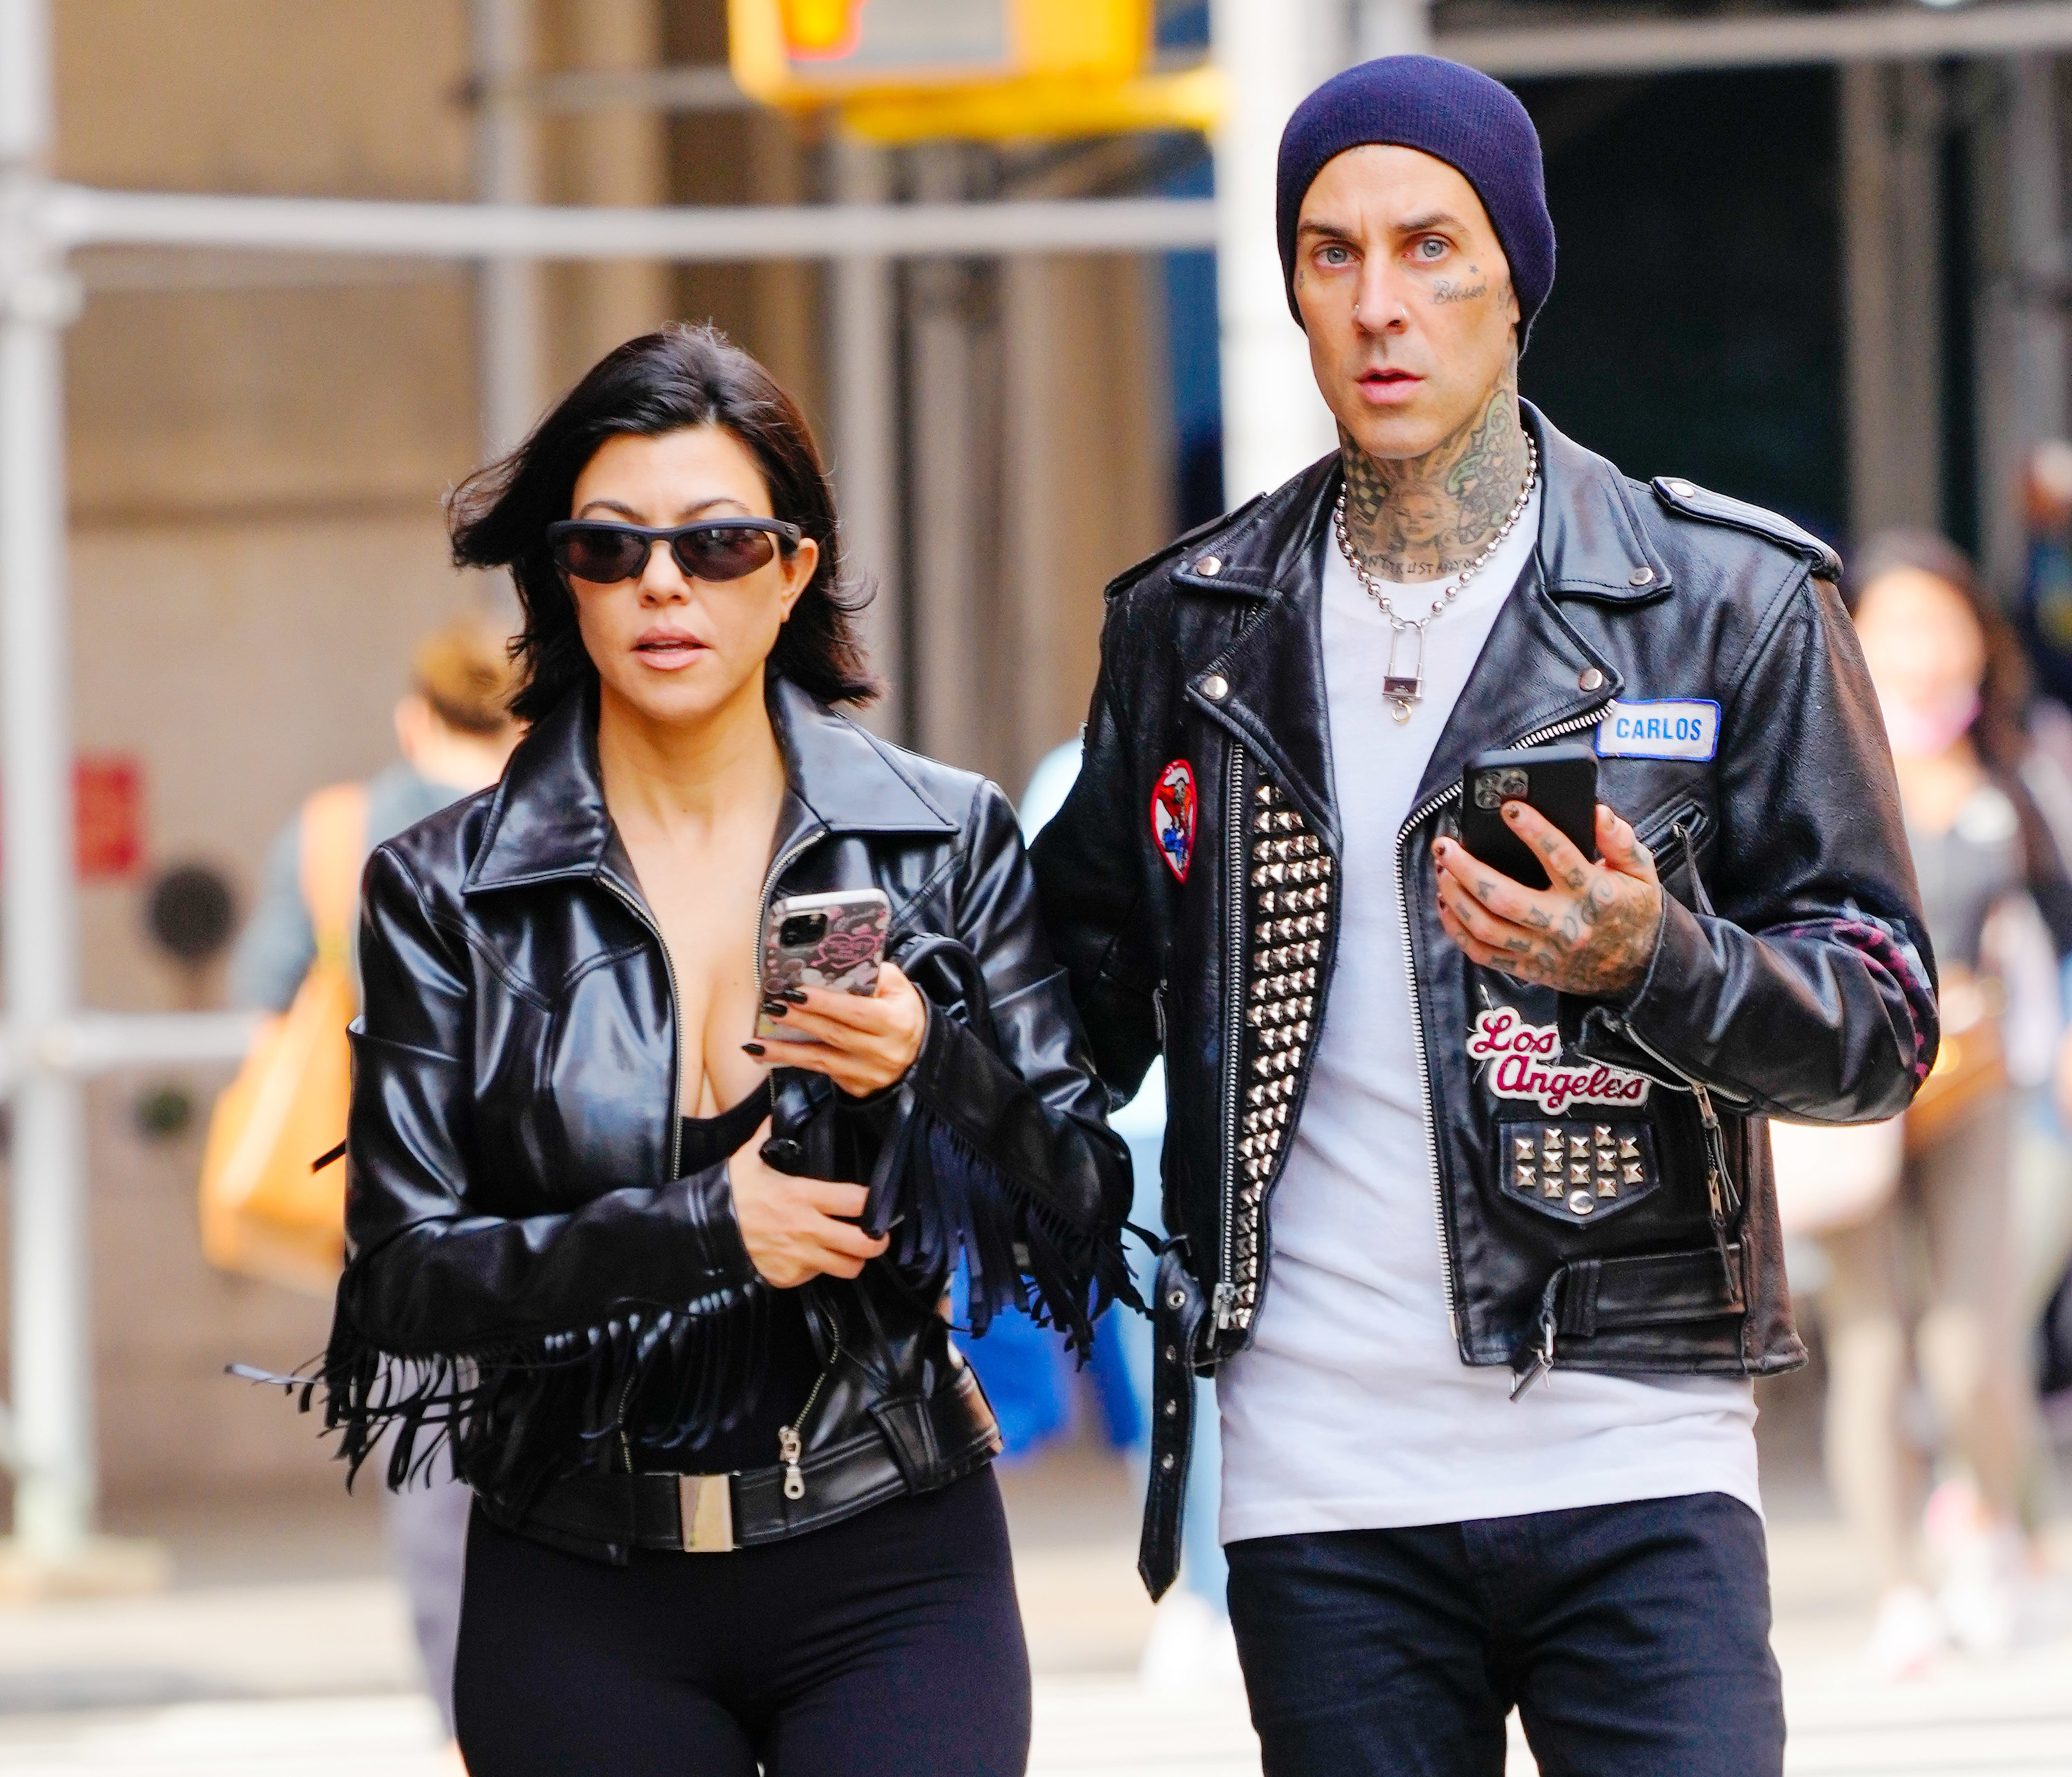 Kourtney and Travis walk down the street while holding their phones